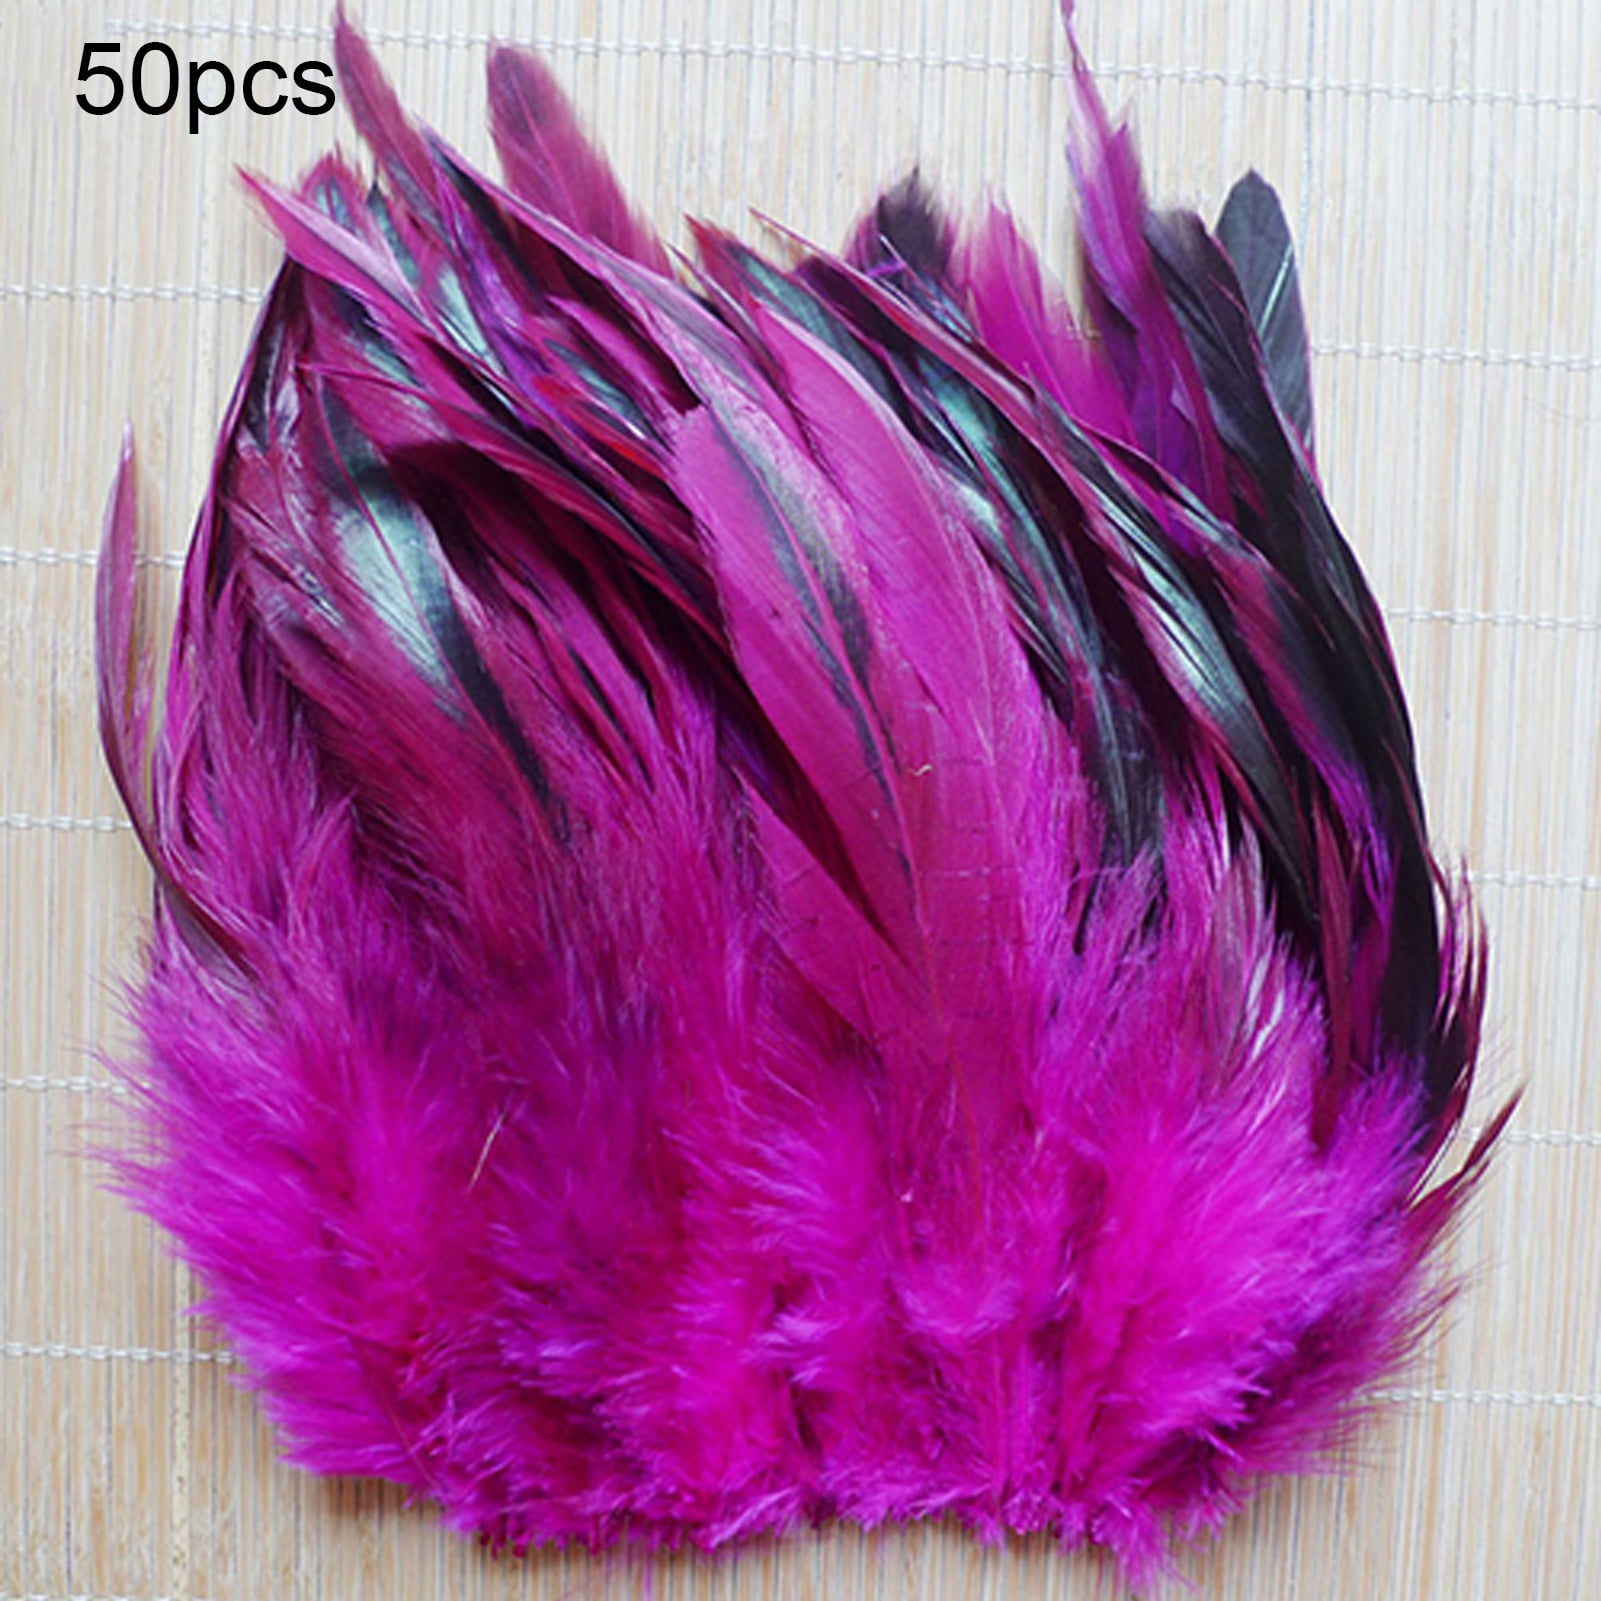 50pcs 13-20cm Natural Beautiful Cock Rooster Tail Feathers for DIY Clothes Decor, Men's, Pink